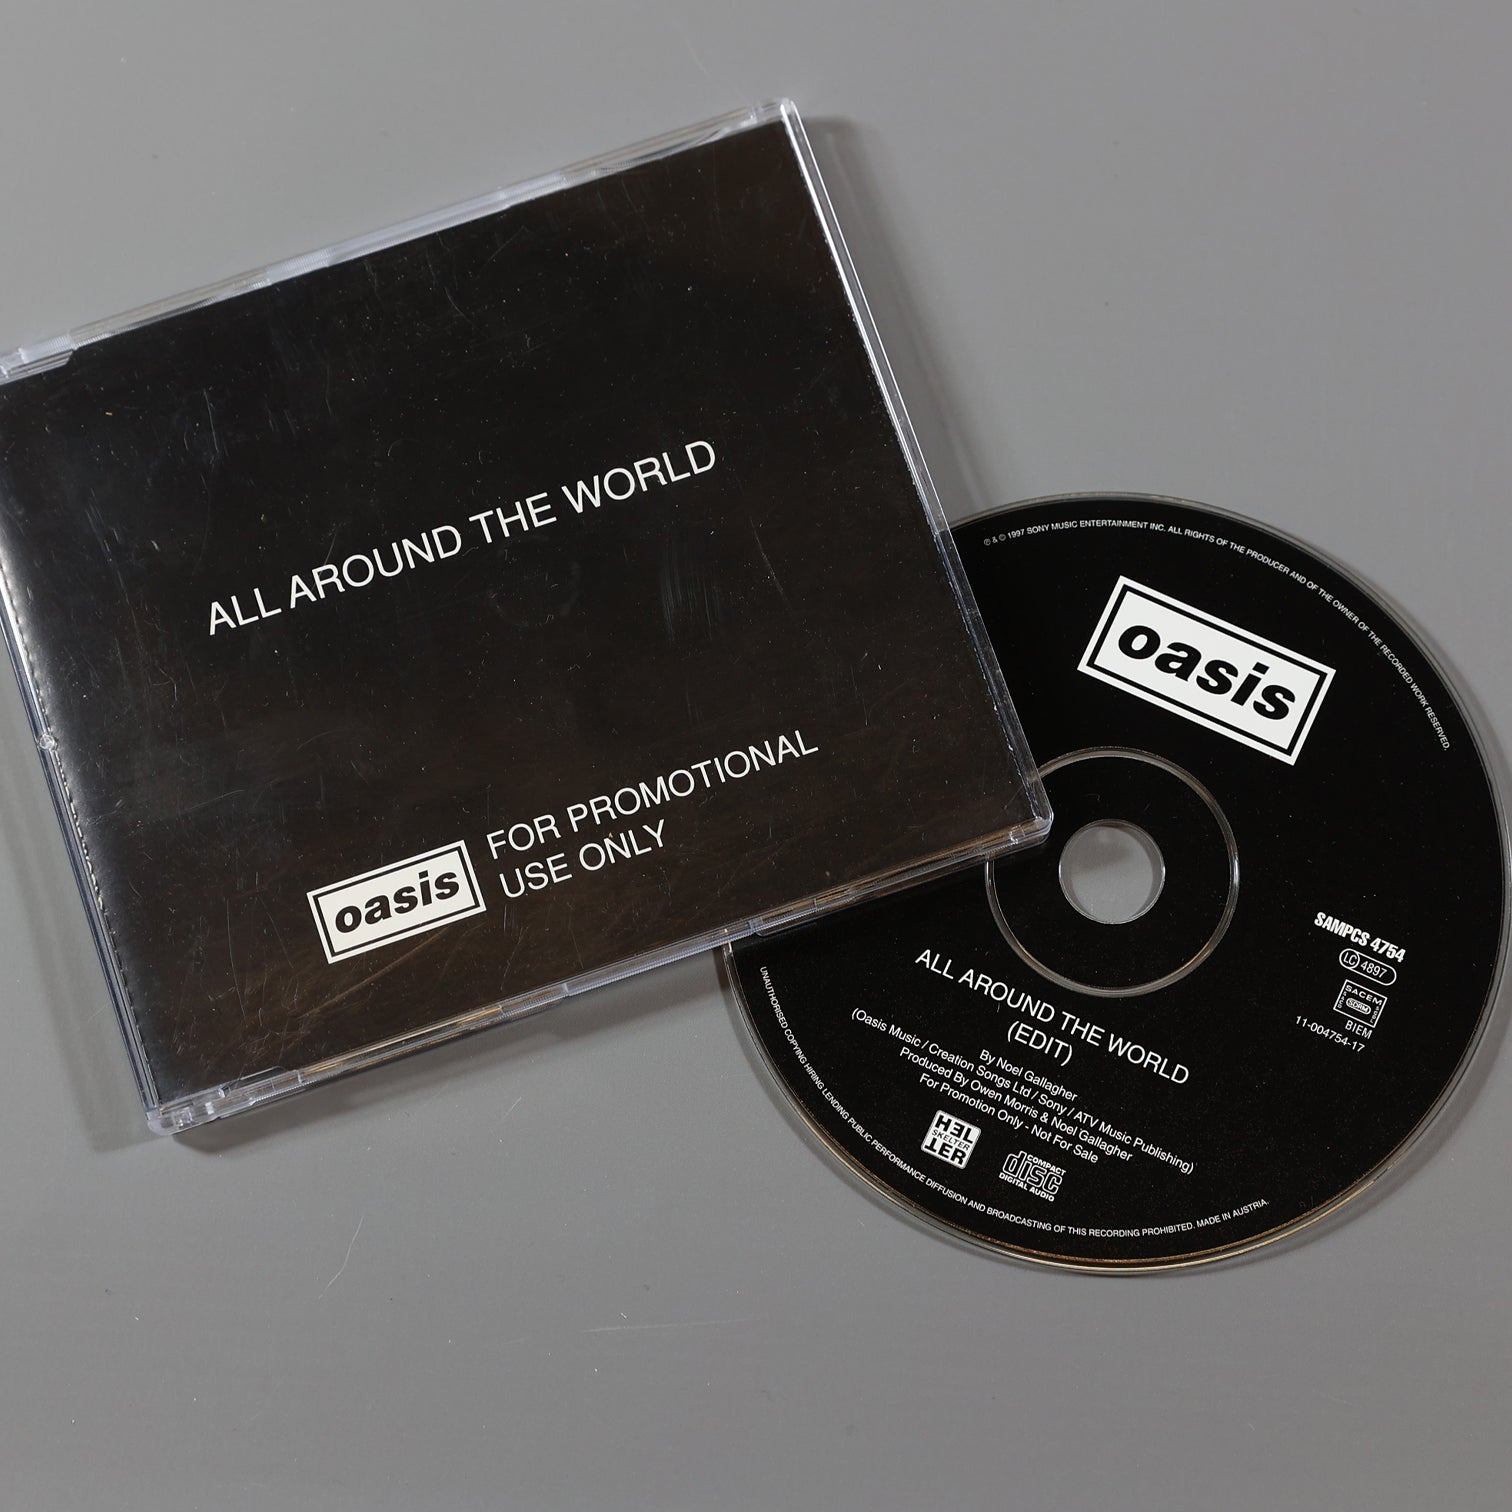 Oasis - All Around The World Promo CD - New Item